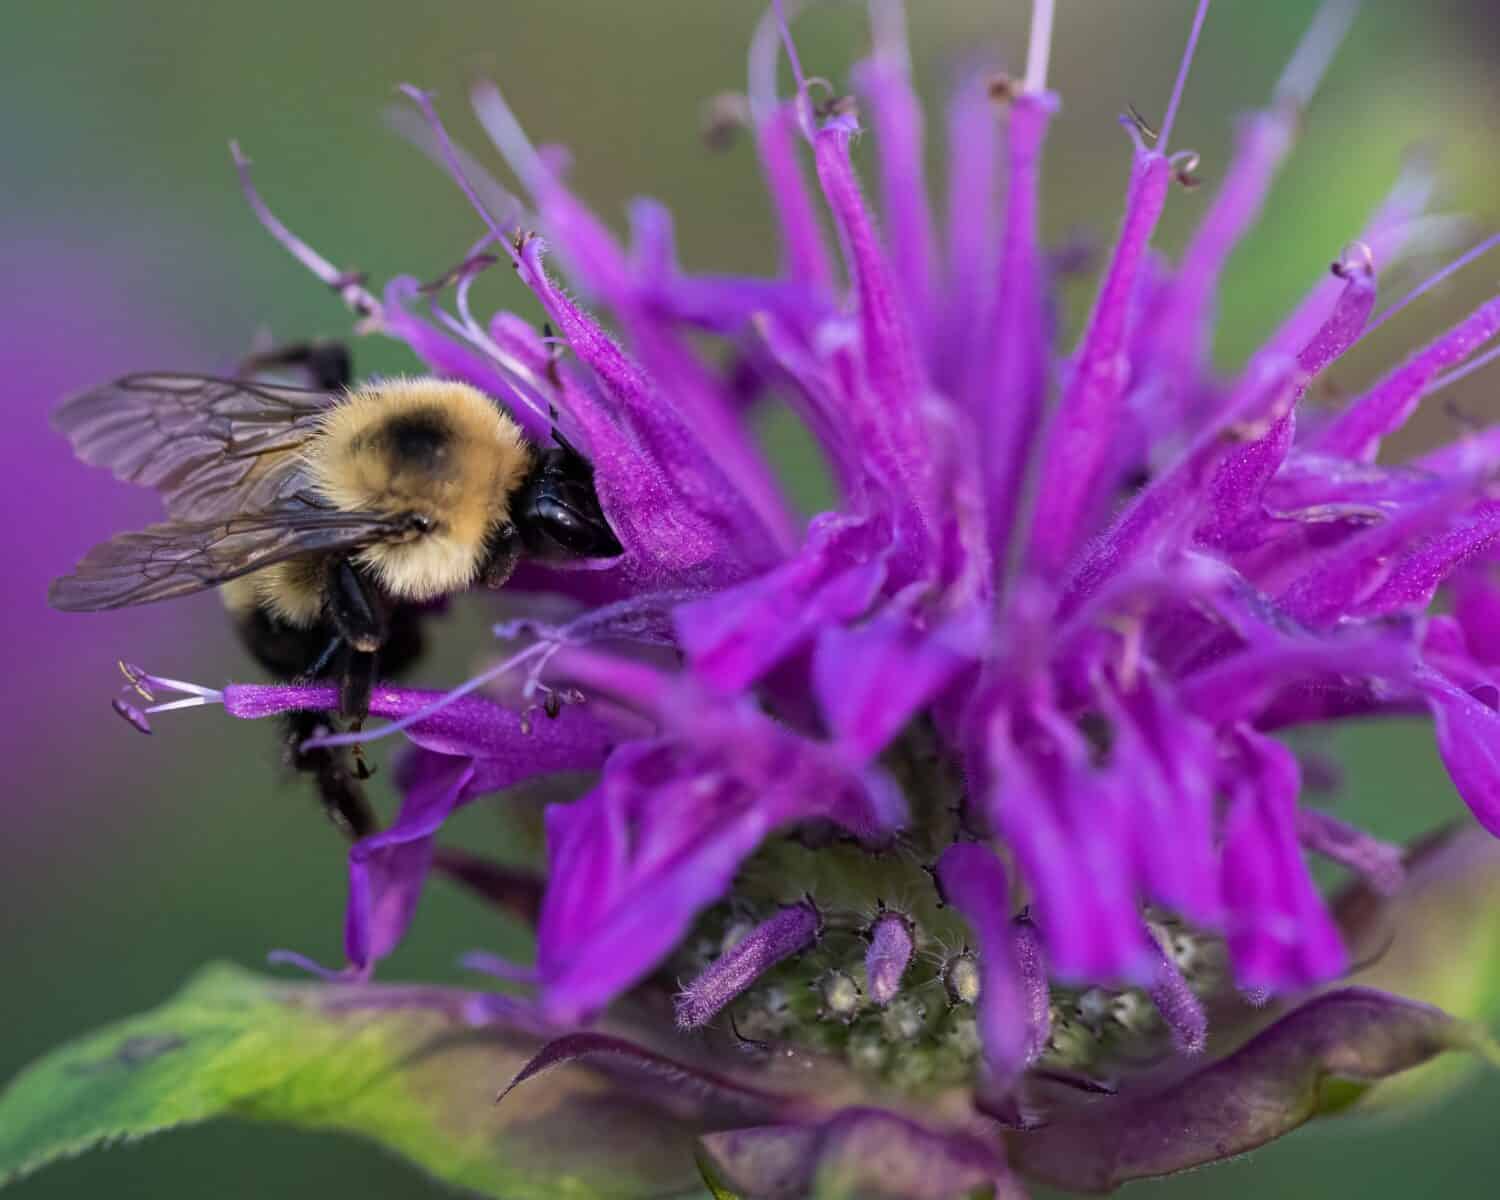 A common eastern bumblebee gathering nectar from bee balm.